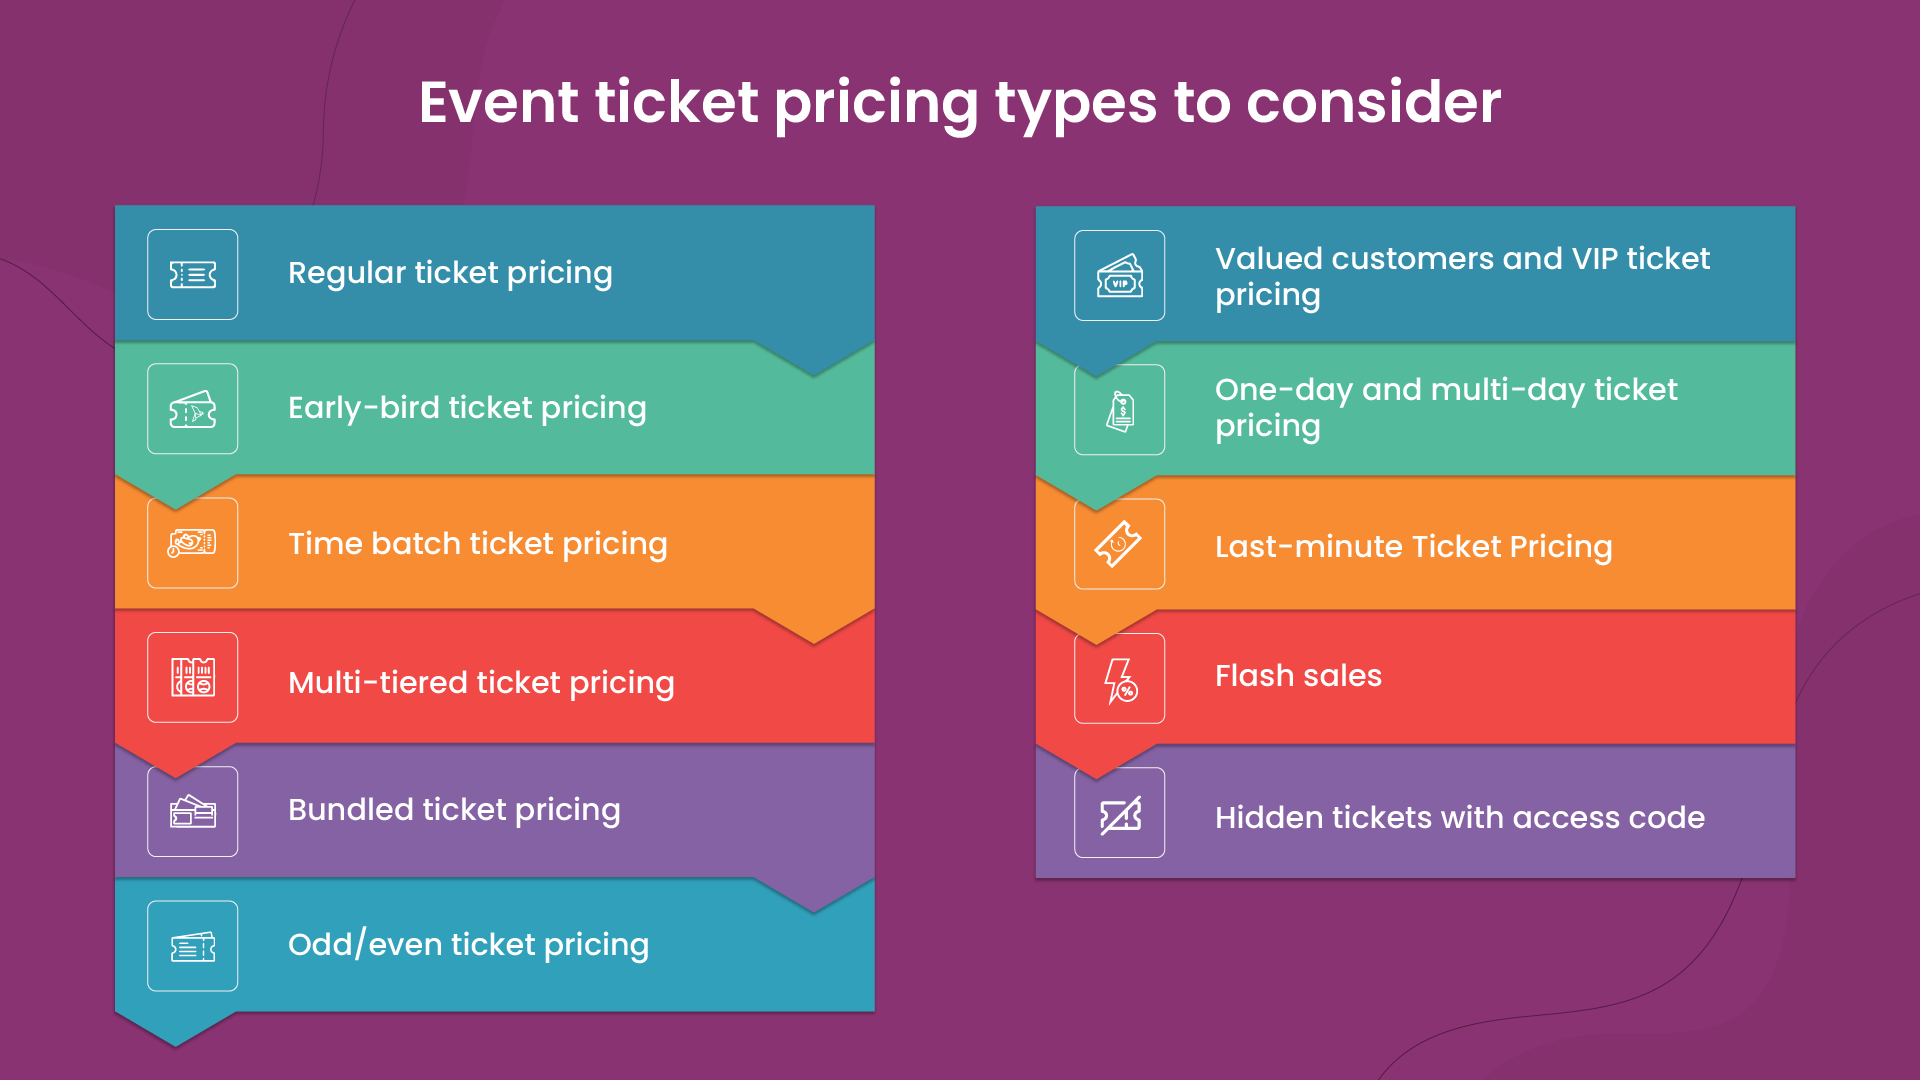 Event ticket pricing types to consider